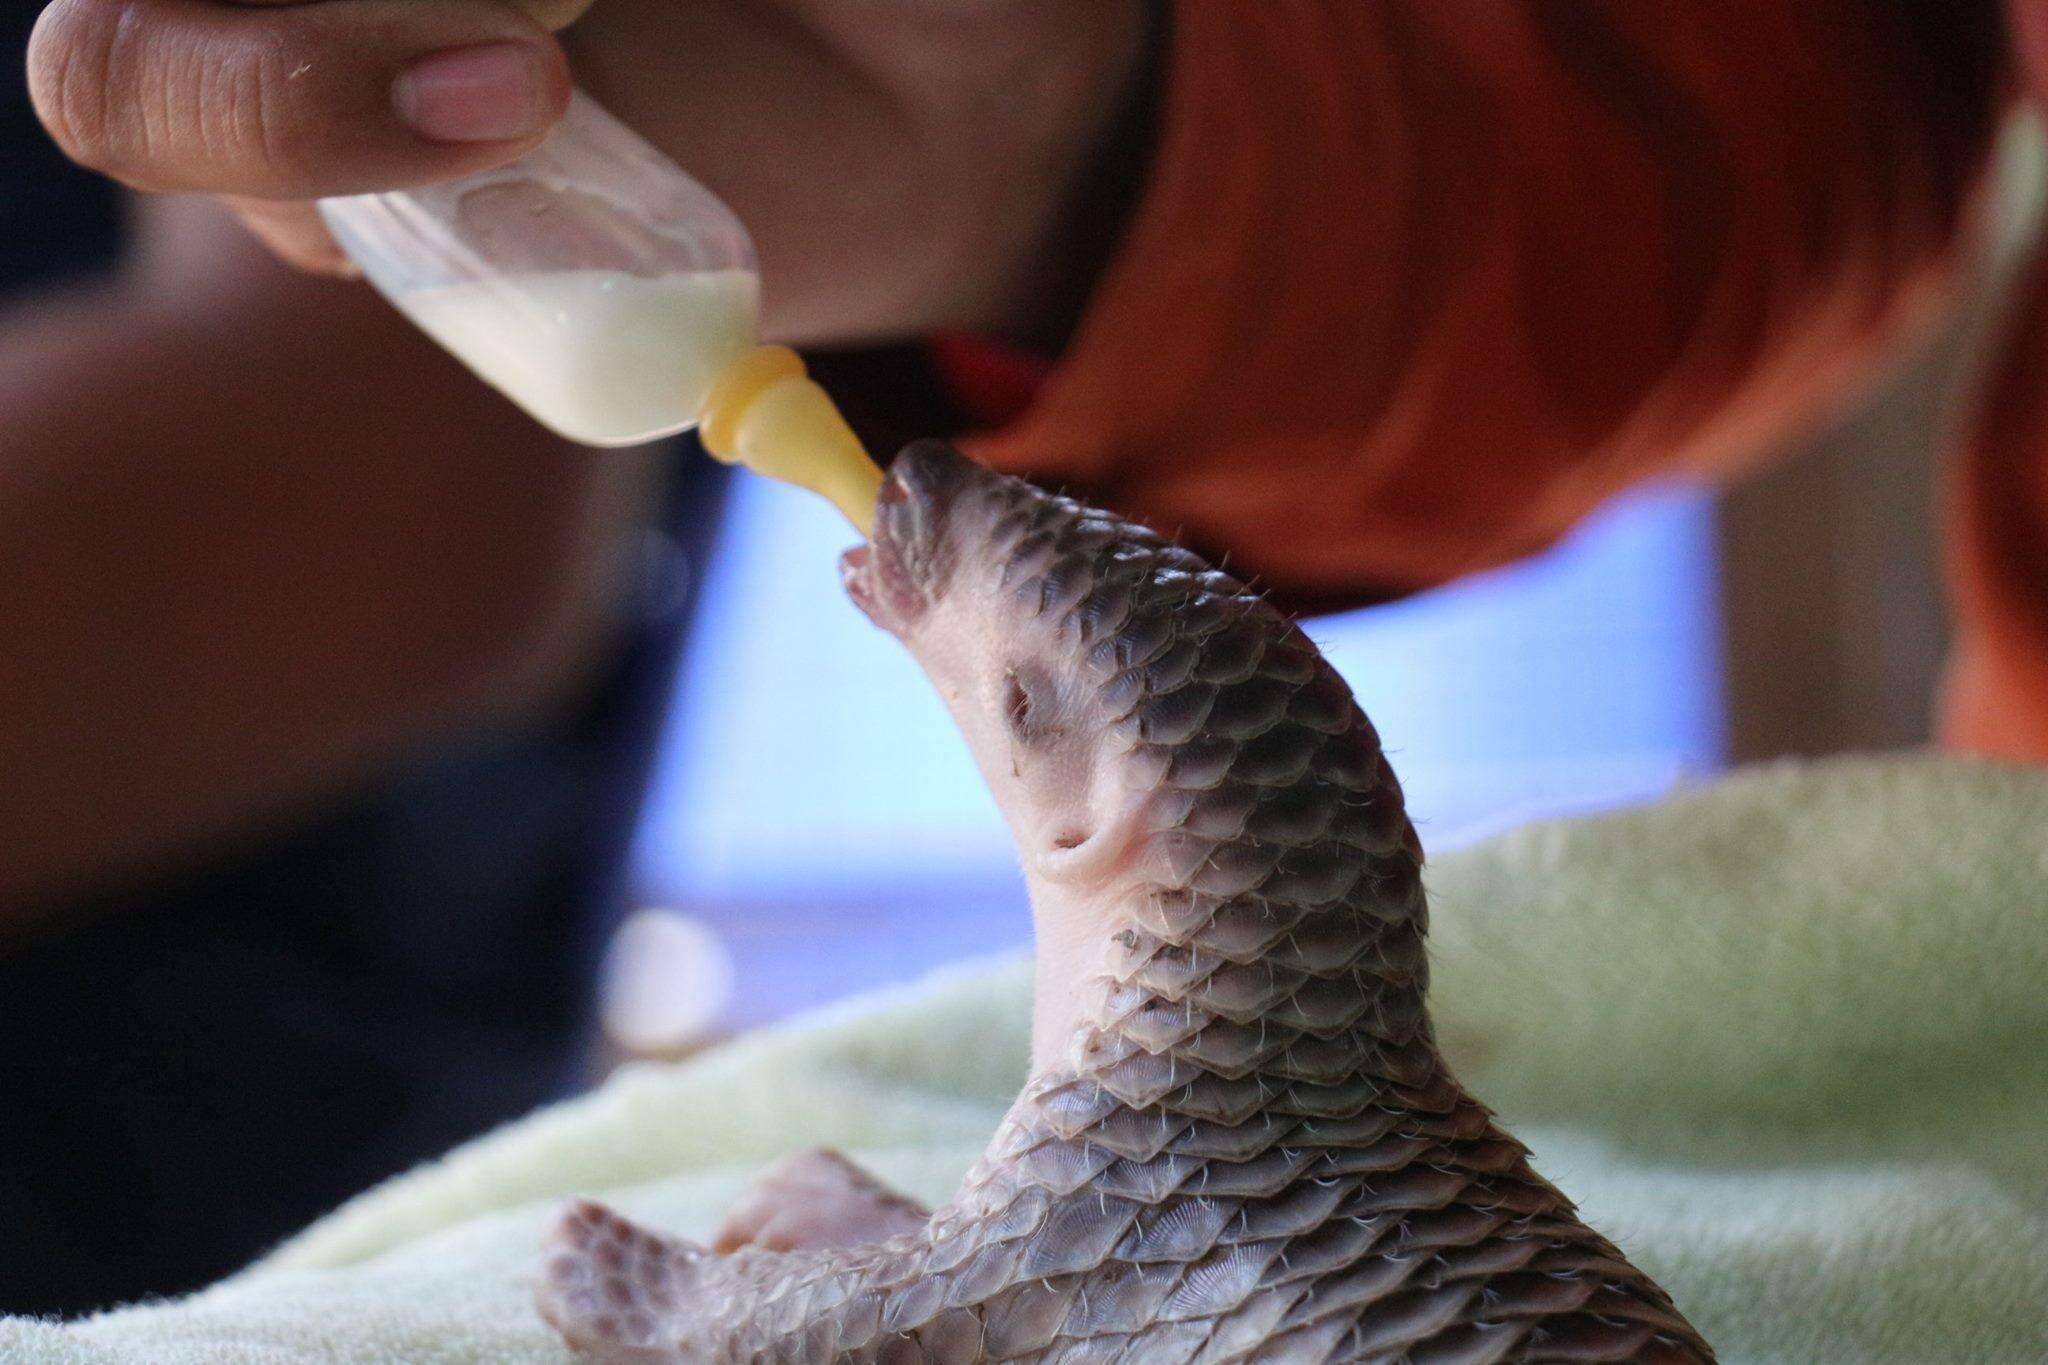 Rescued infant pangolin getting bottlefed in Cambodia